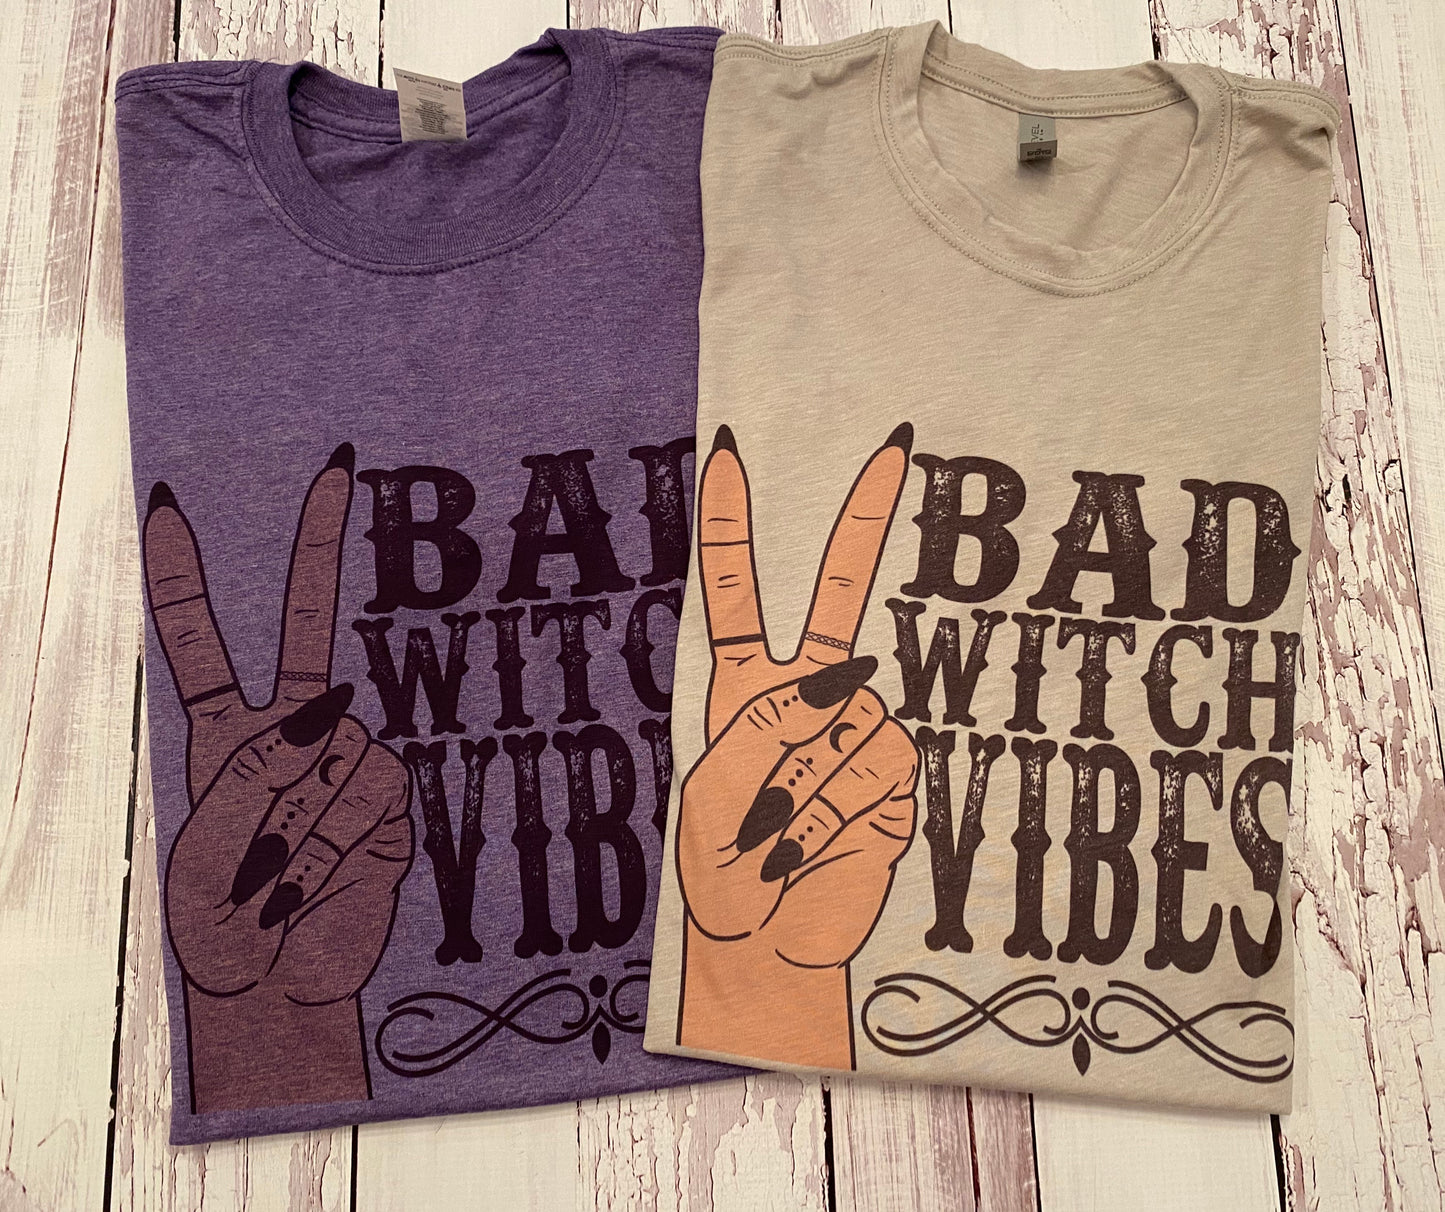 Bad Witch Vibes Tee